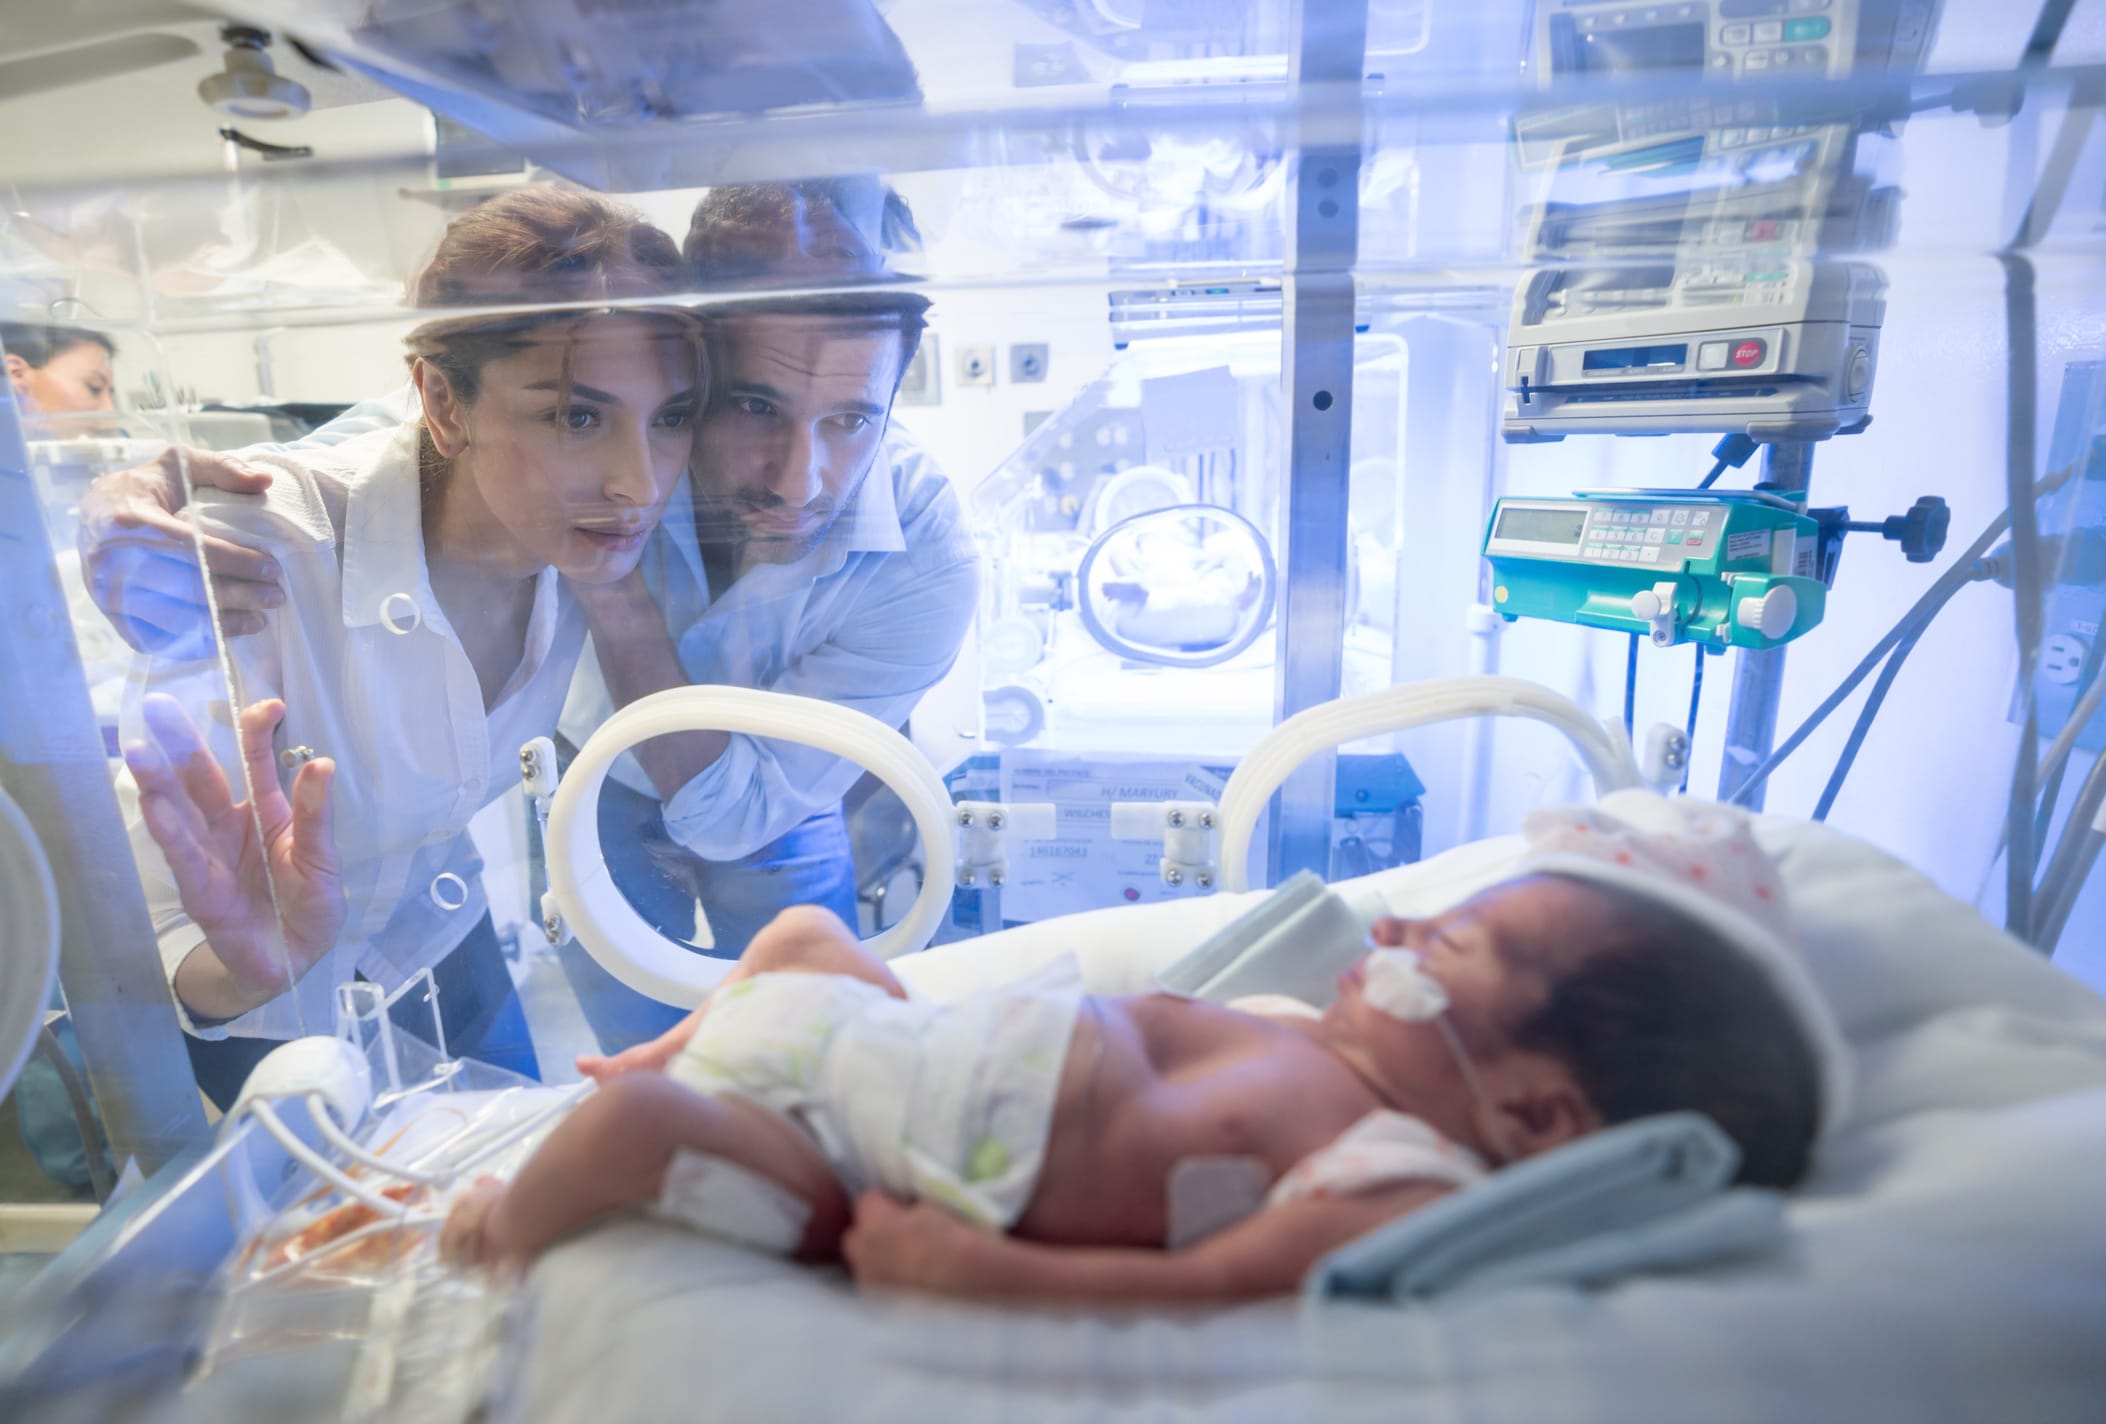 What To Do During the Neonatal Period & How To Take Care of a Newborn Baby?